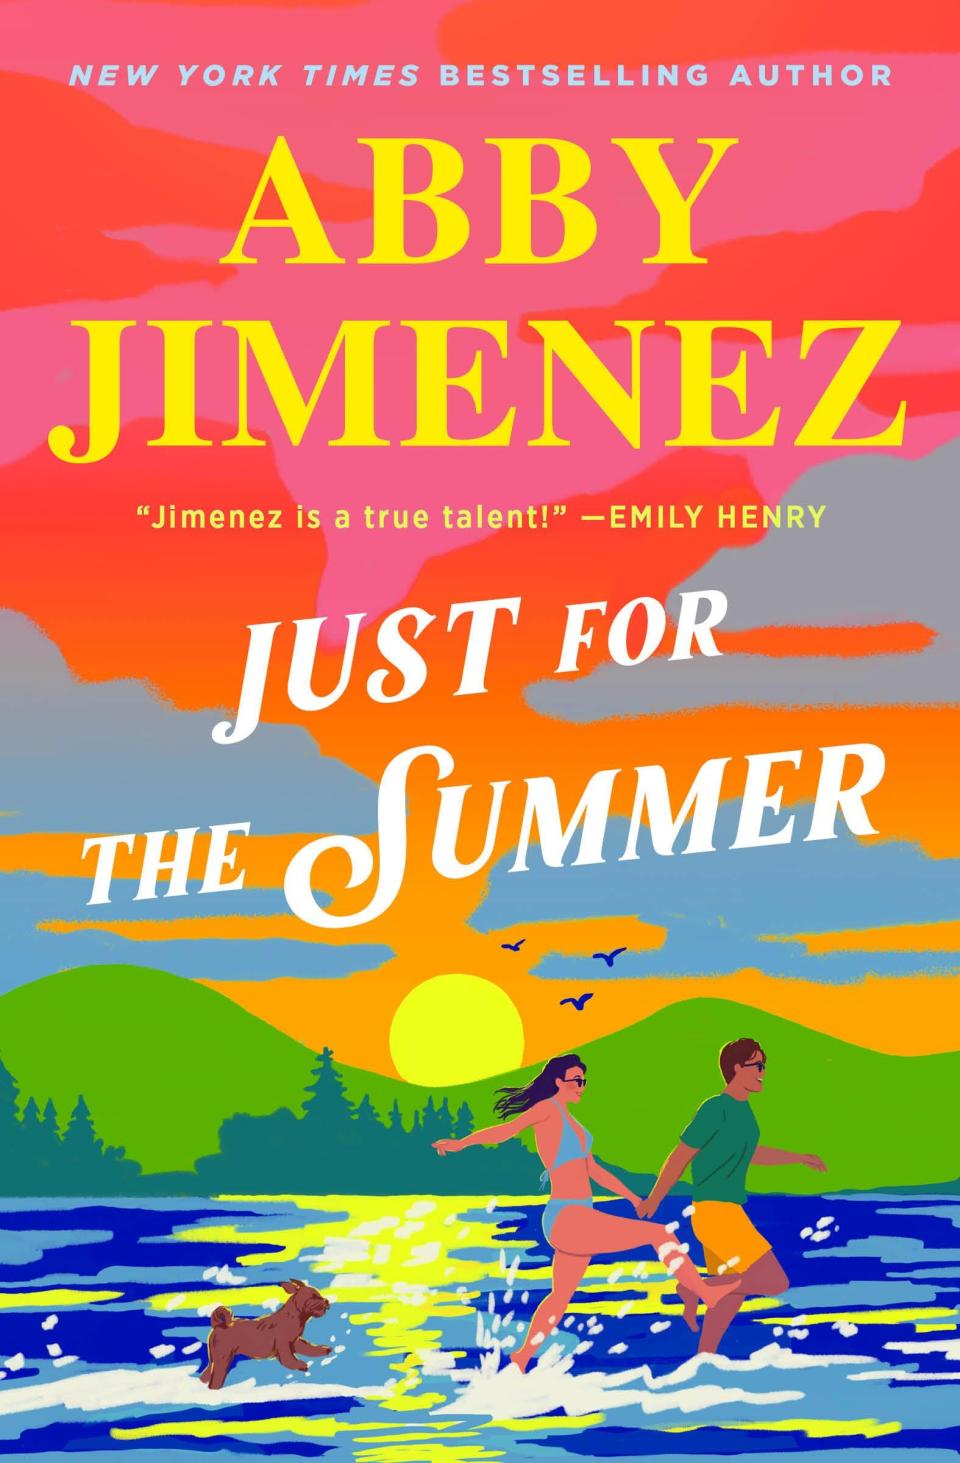 "Just For The Summer" by Abby Jimenez